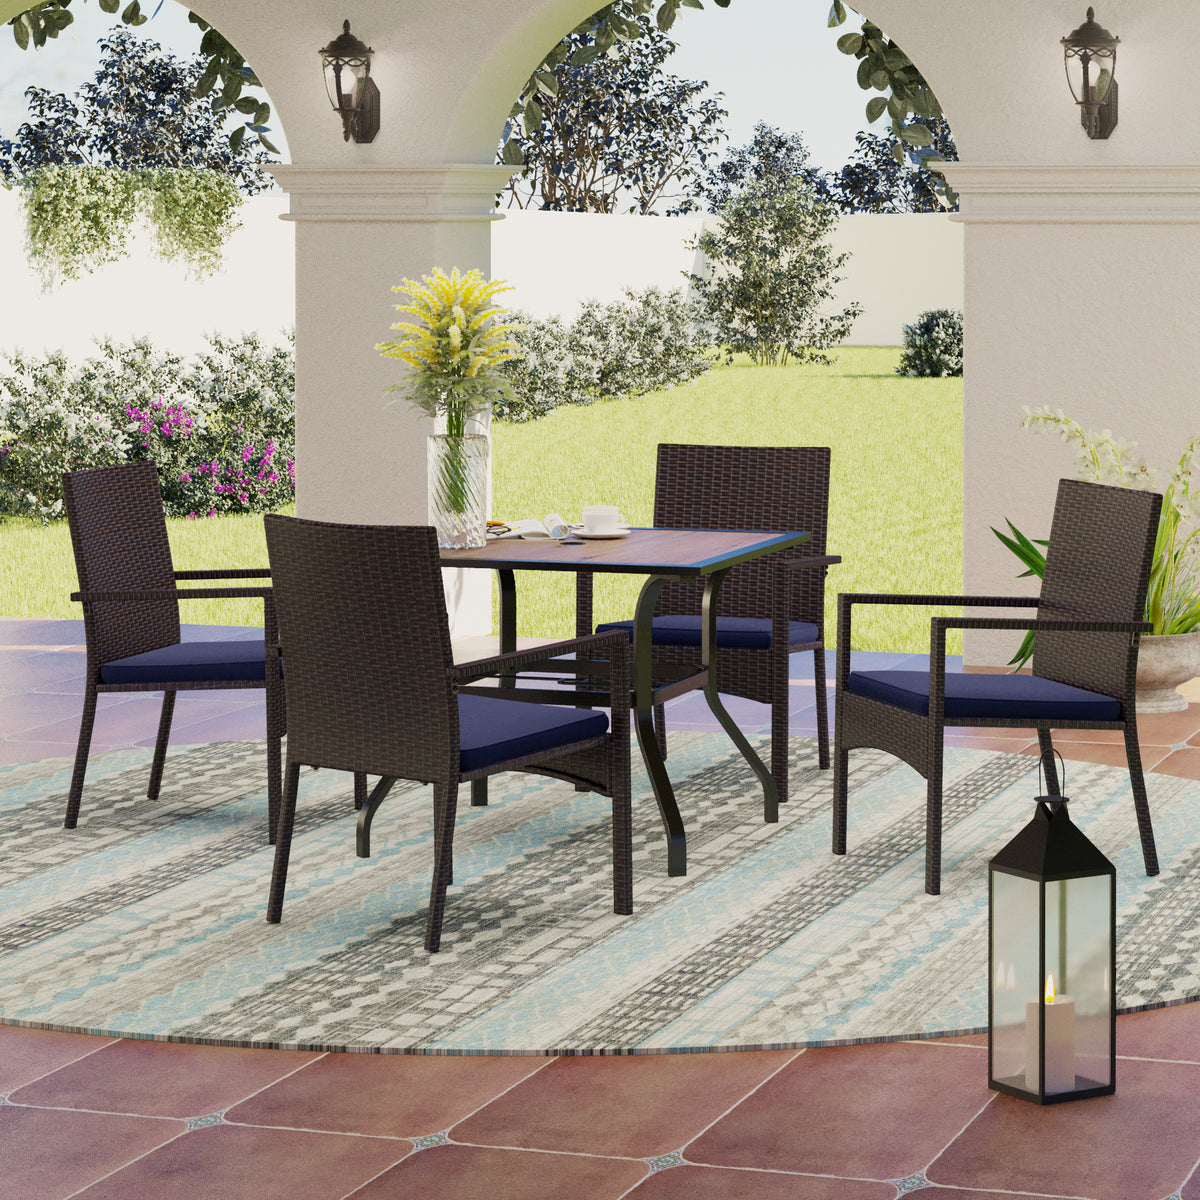 MFSTUDIO Wood-Look PVC Table and 4 Rattan Chairs with Cushions 5-Piece Patio Dining Set